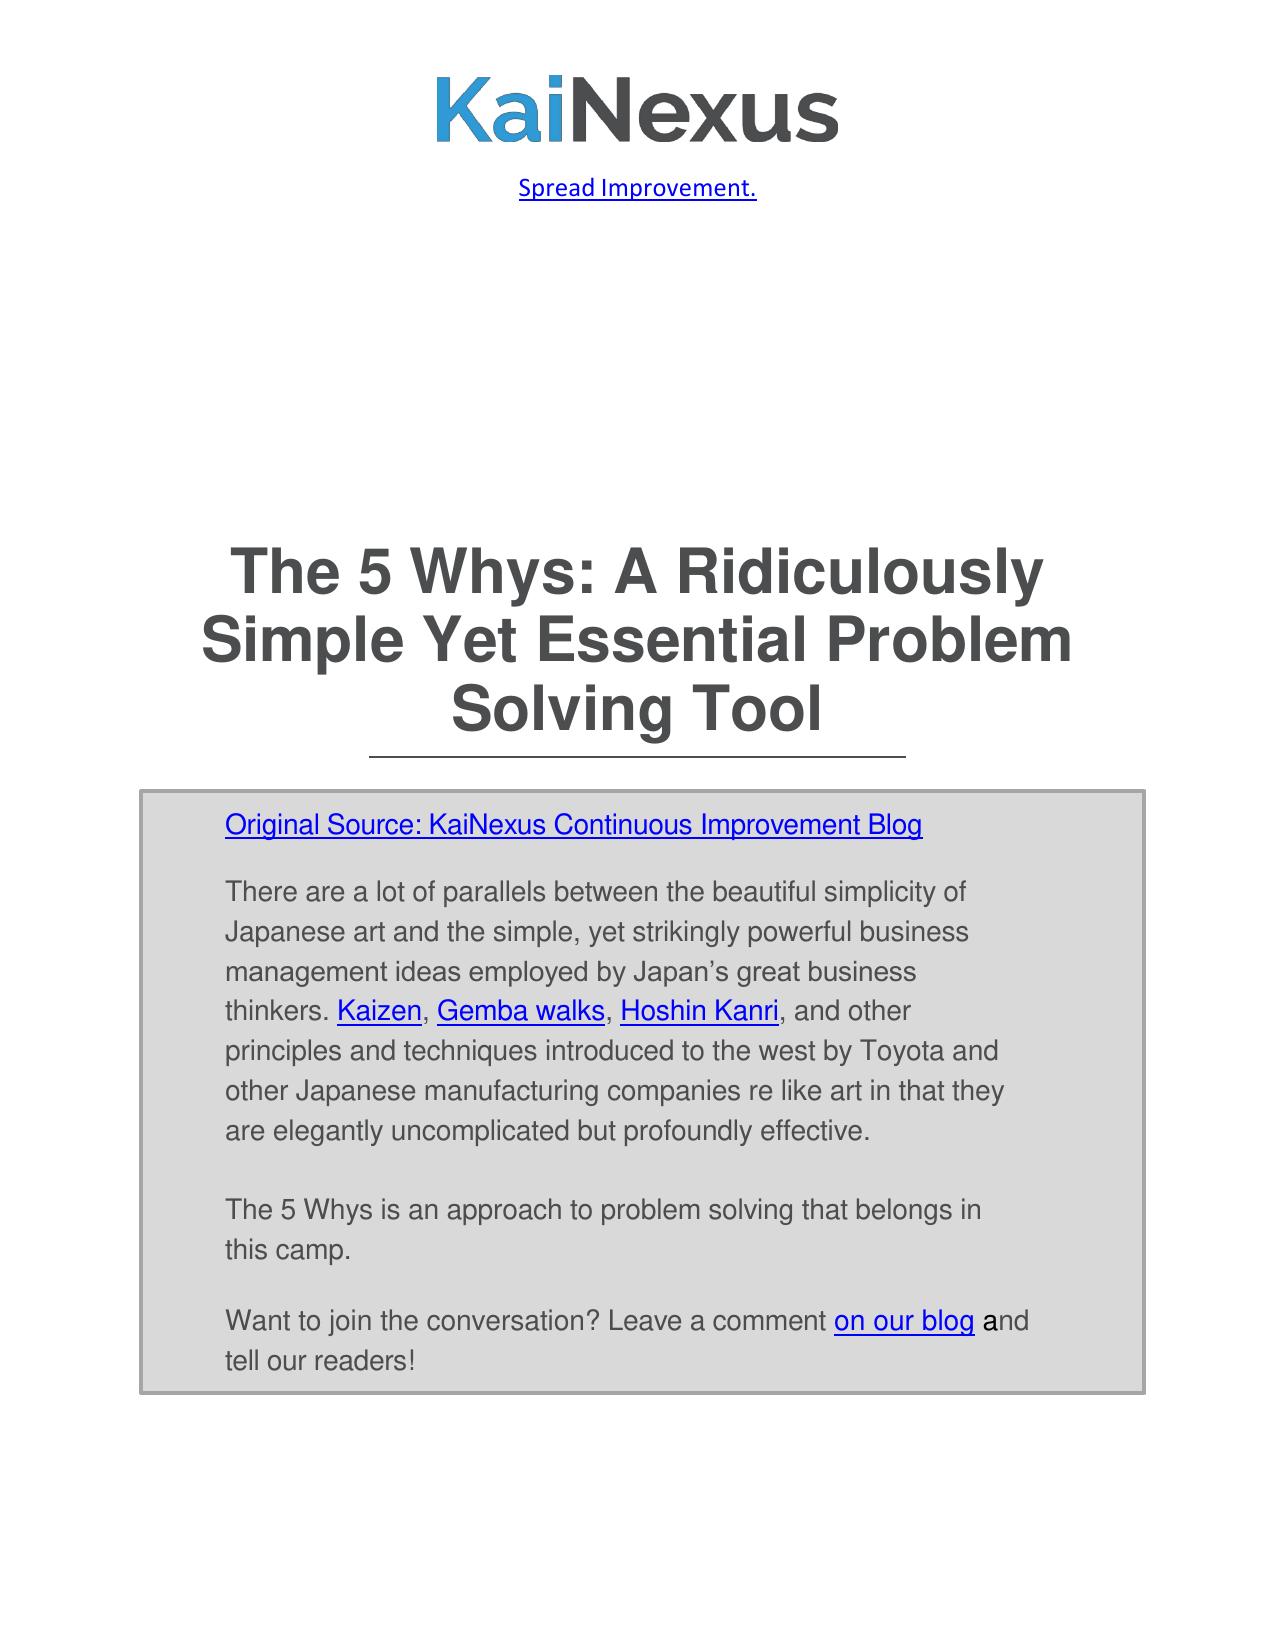 The 5 Whys - A Ridiculously Simple, Yet Essential Problem Solving Tool